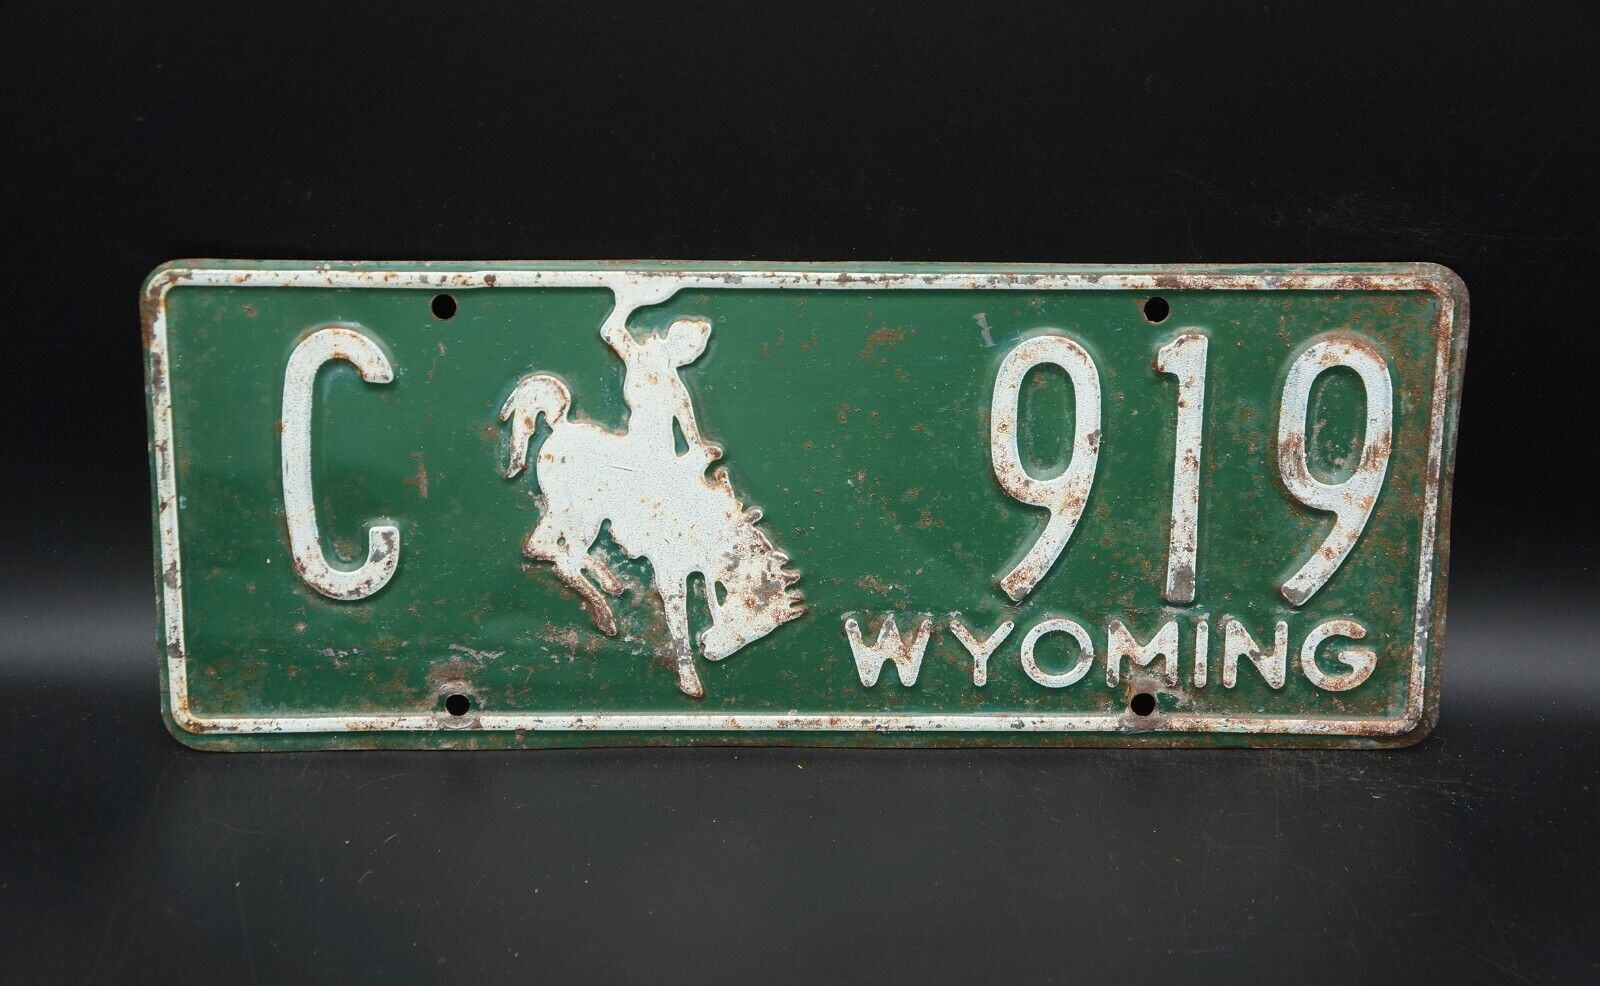 1952 1953 1954 1955 Green WYOMING County License Plate # C - 919